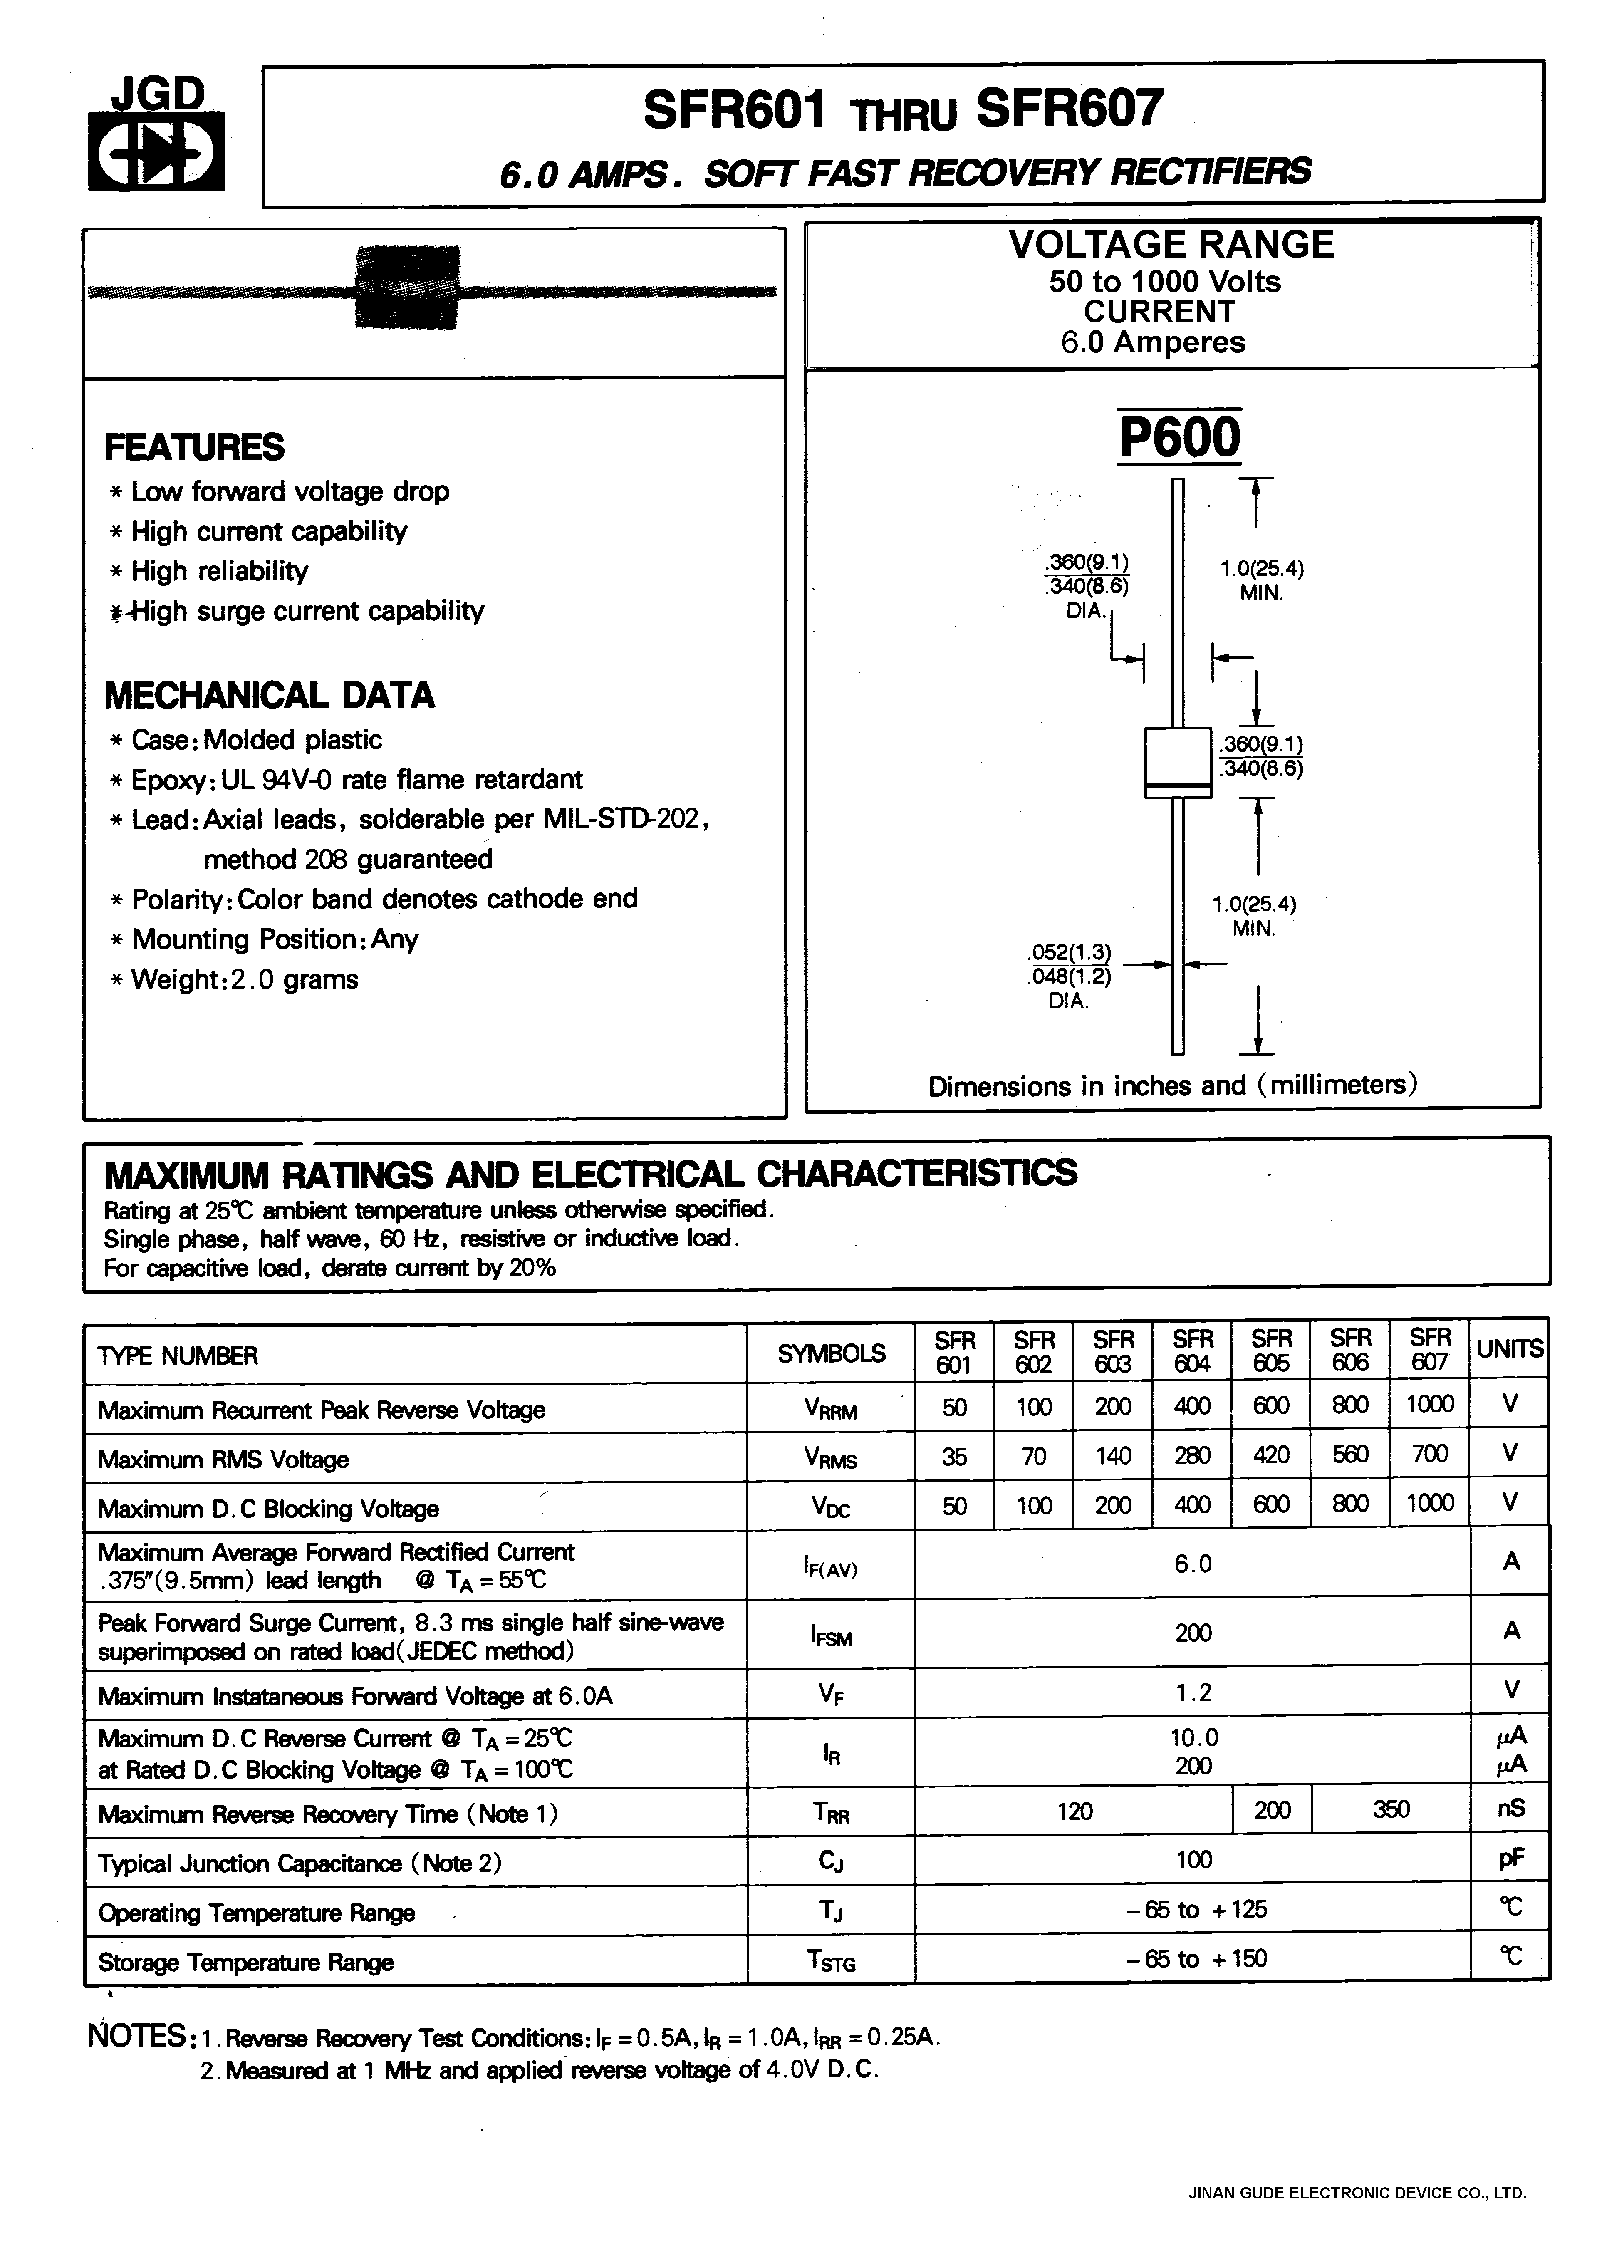 Datasheet SFR604 - 6.0 AMPS. SOFT FAST RECOVERY RECTIFIERS page 1